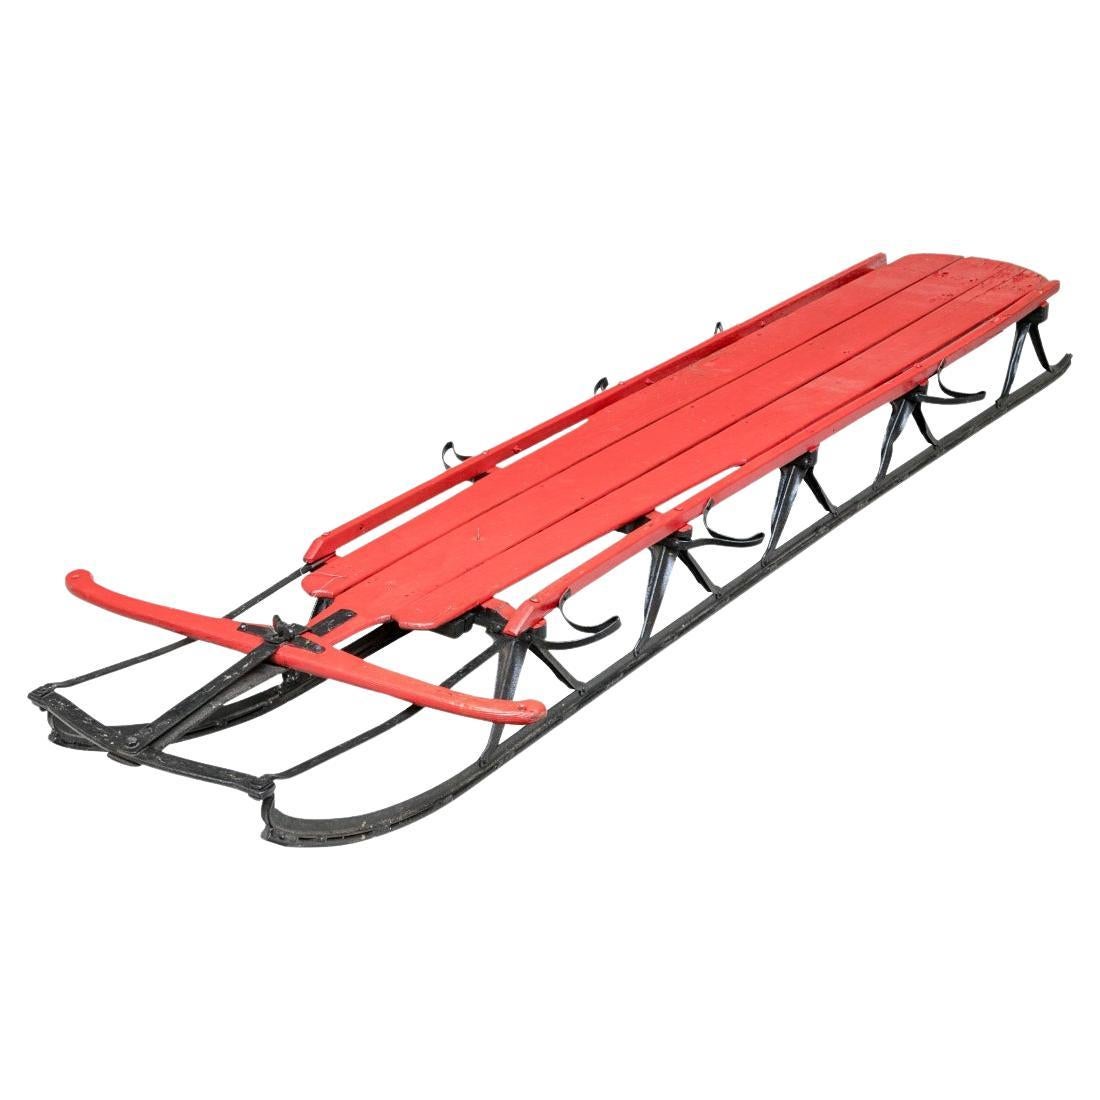 Vintage Red Paint Decorated Extra Long Sled Attributed To Flexible Flyer For Sale